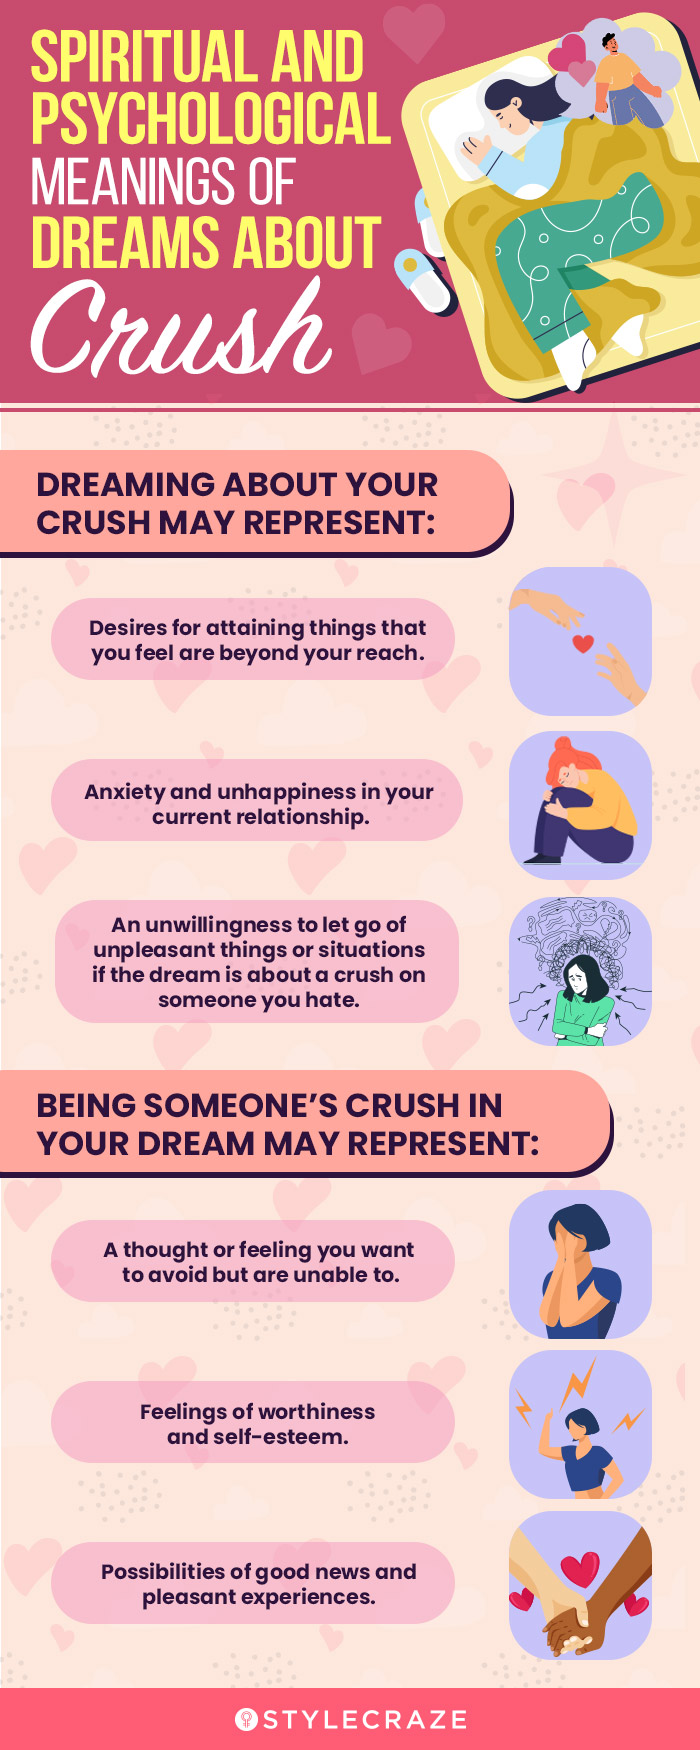 spiritual and psychological meanings of dreams about crush (infographic)